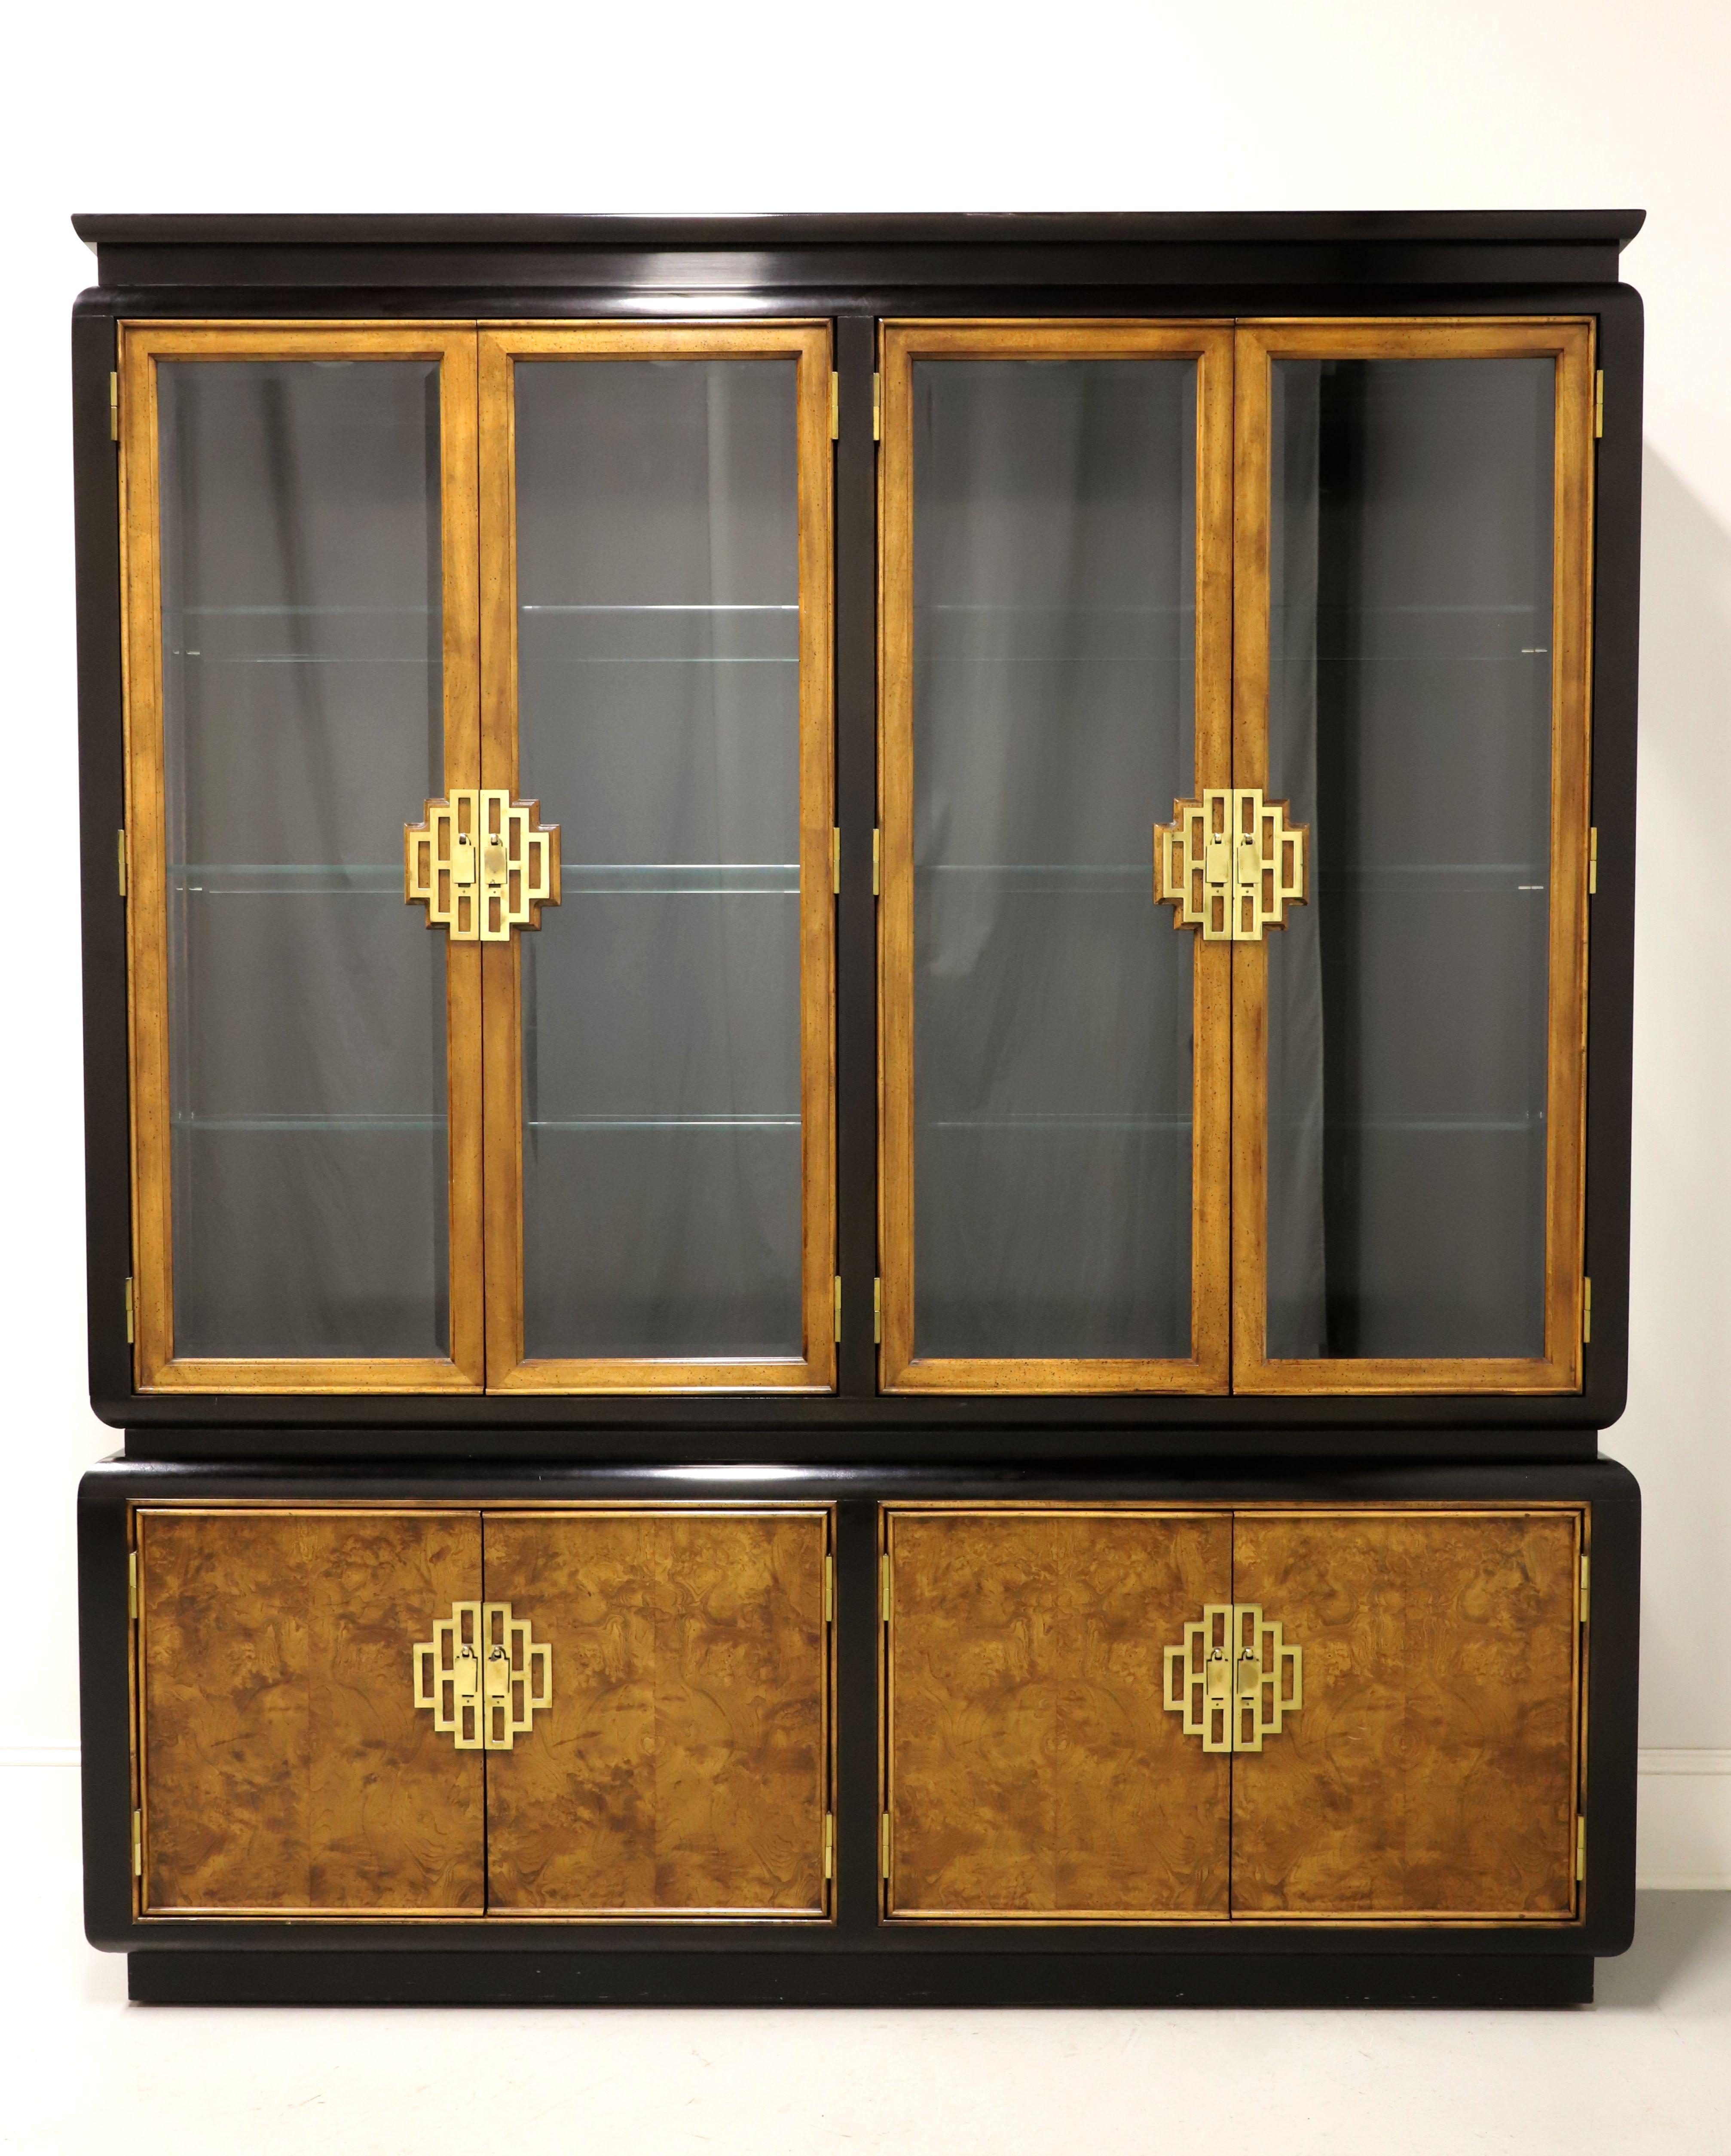 An Asian style dual china display cabinet by high-quality furniture maker Century Furniture, from their 